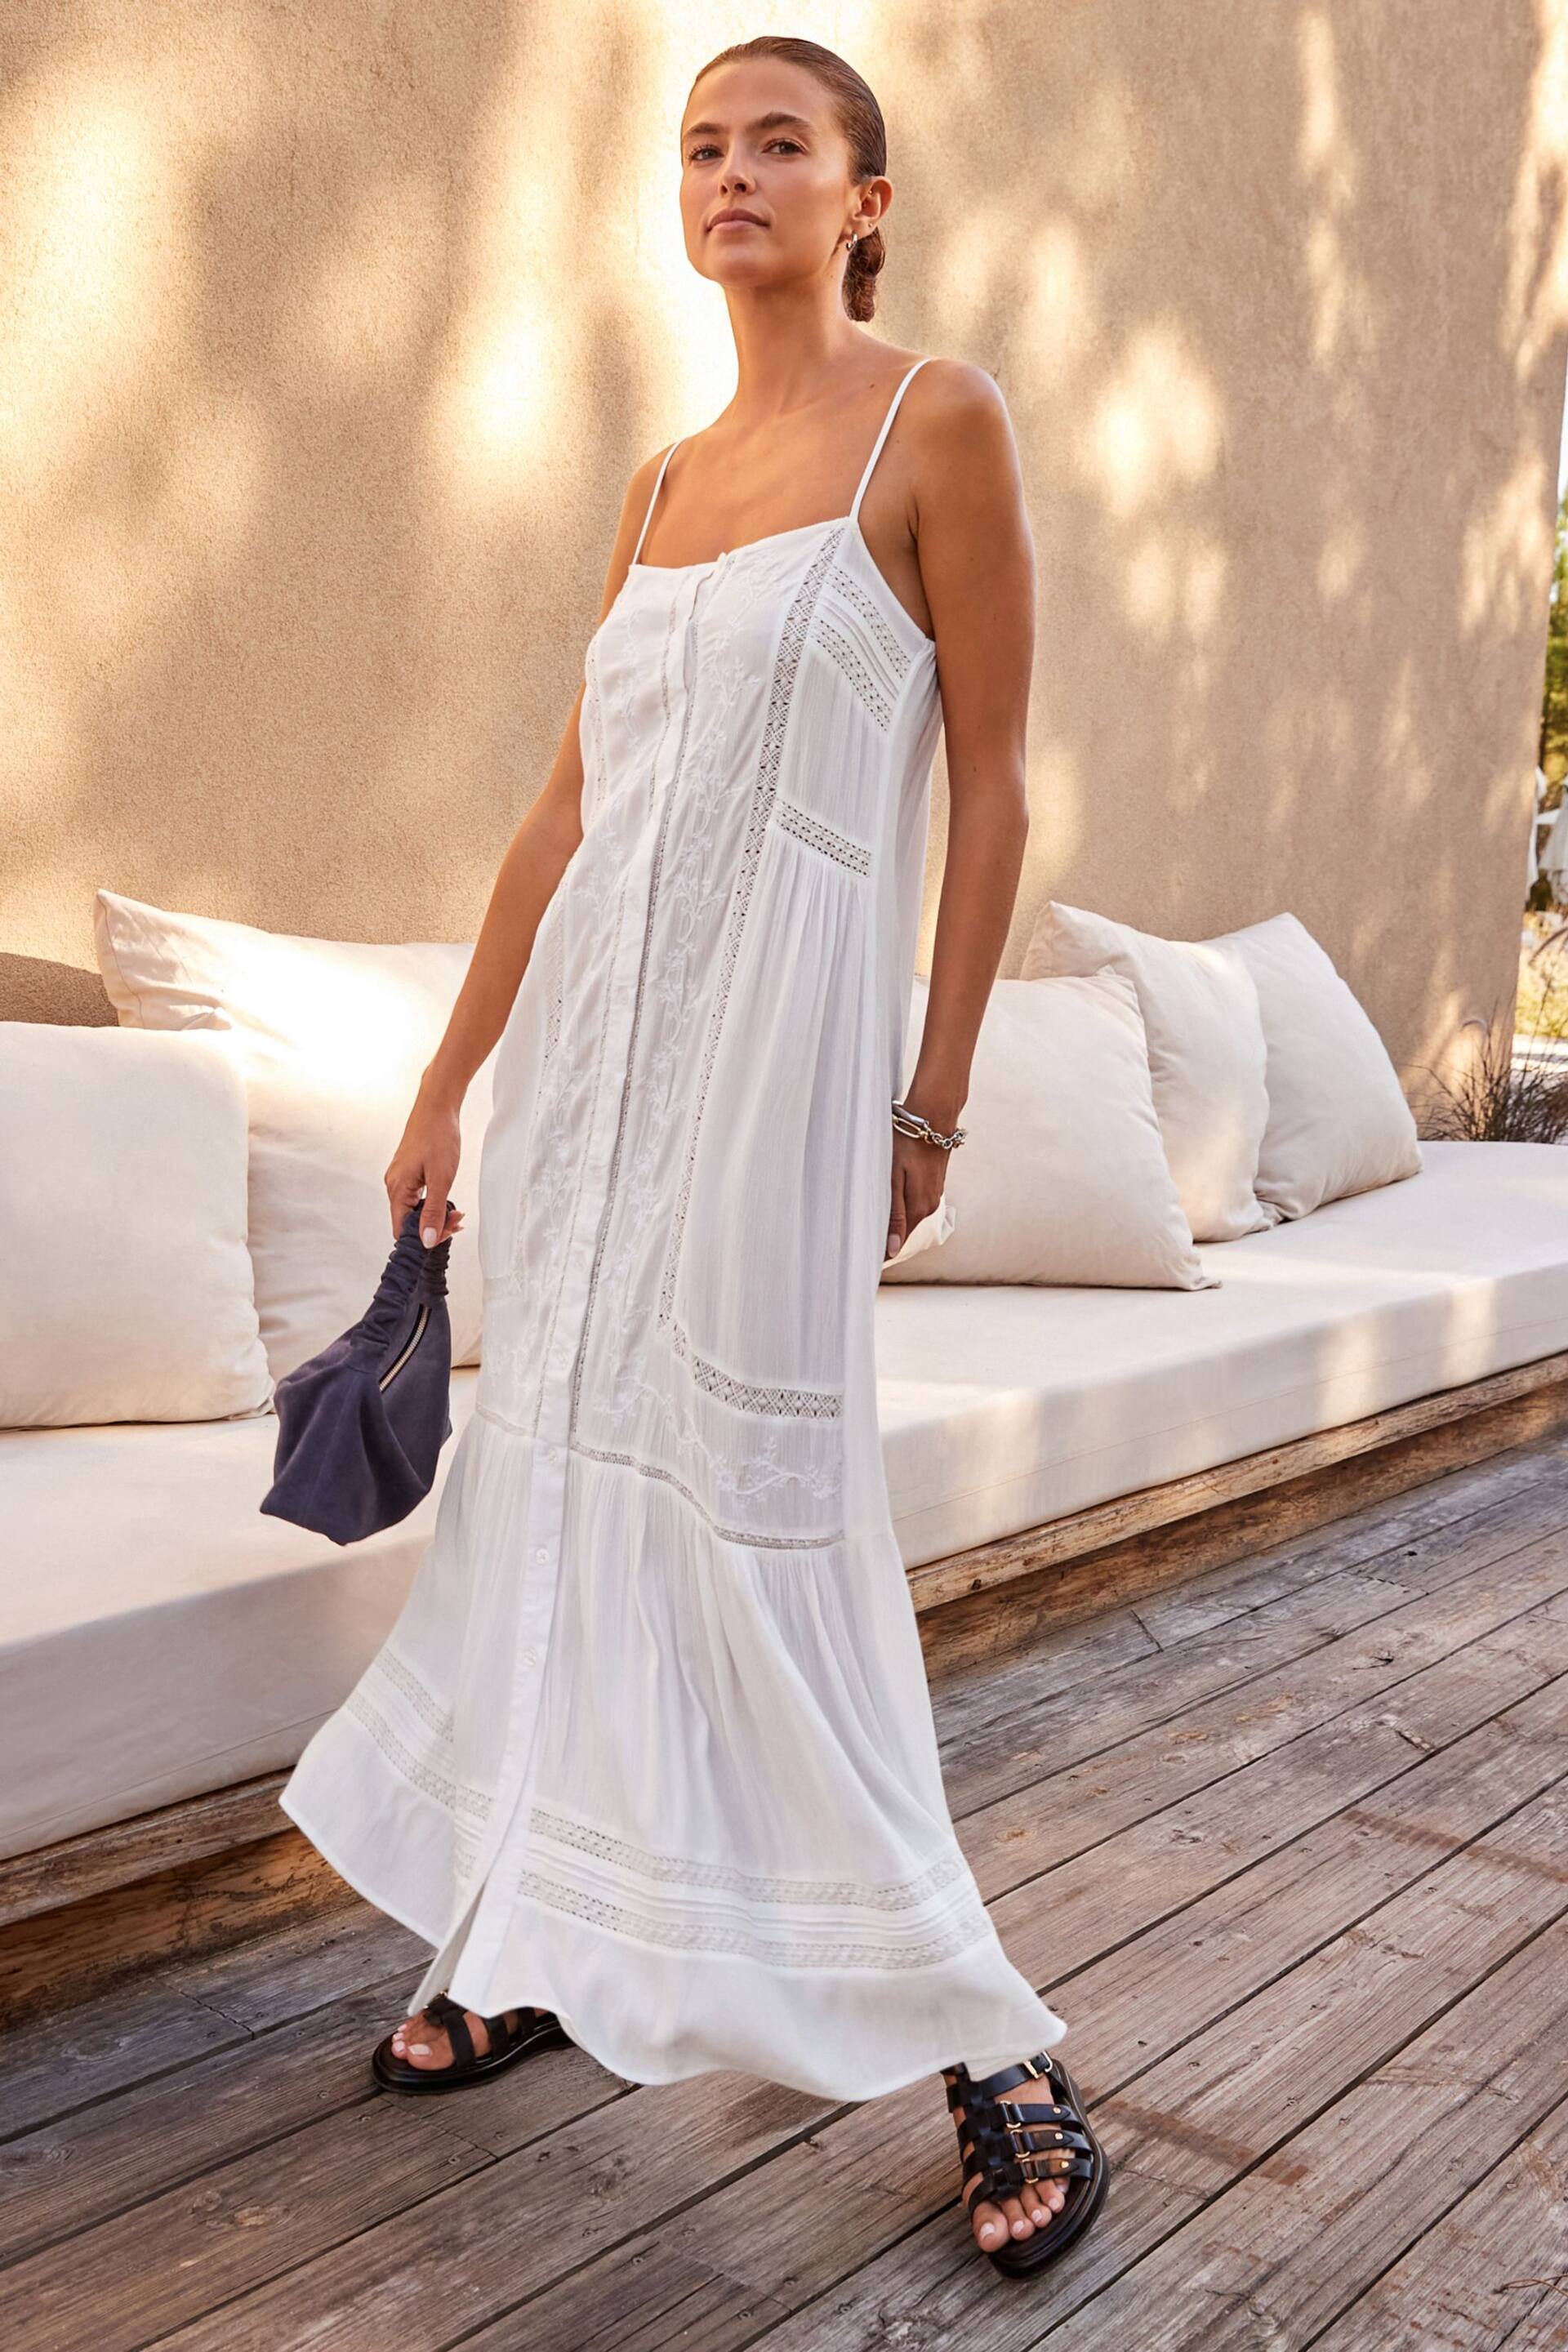 White Embroidered Strappy Maxi Summer Dress - Image 5 of 8